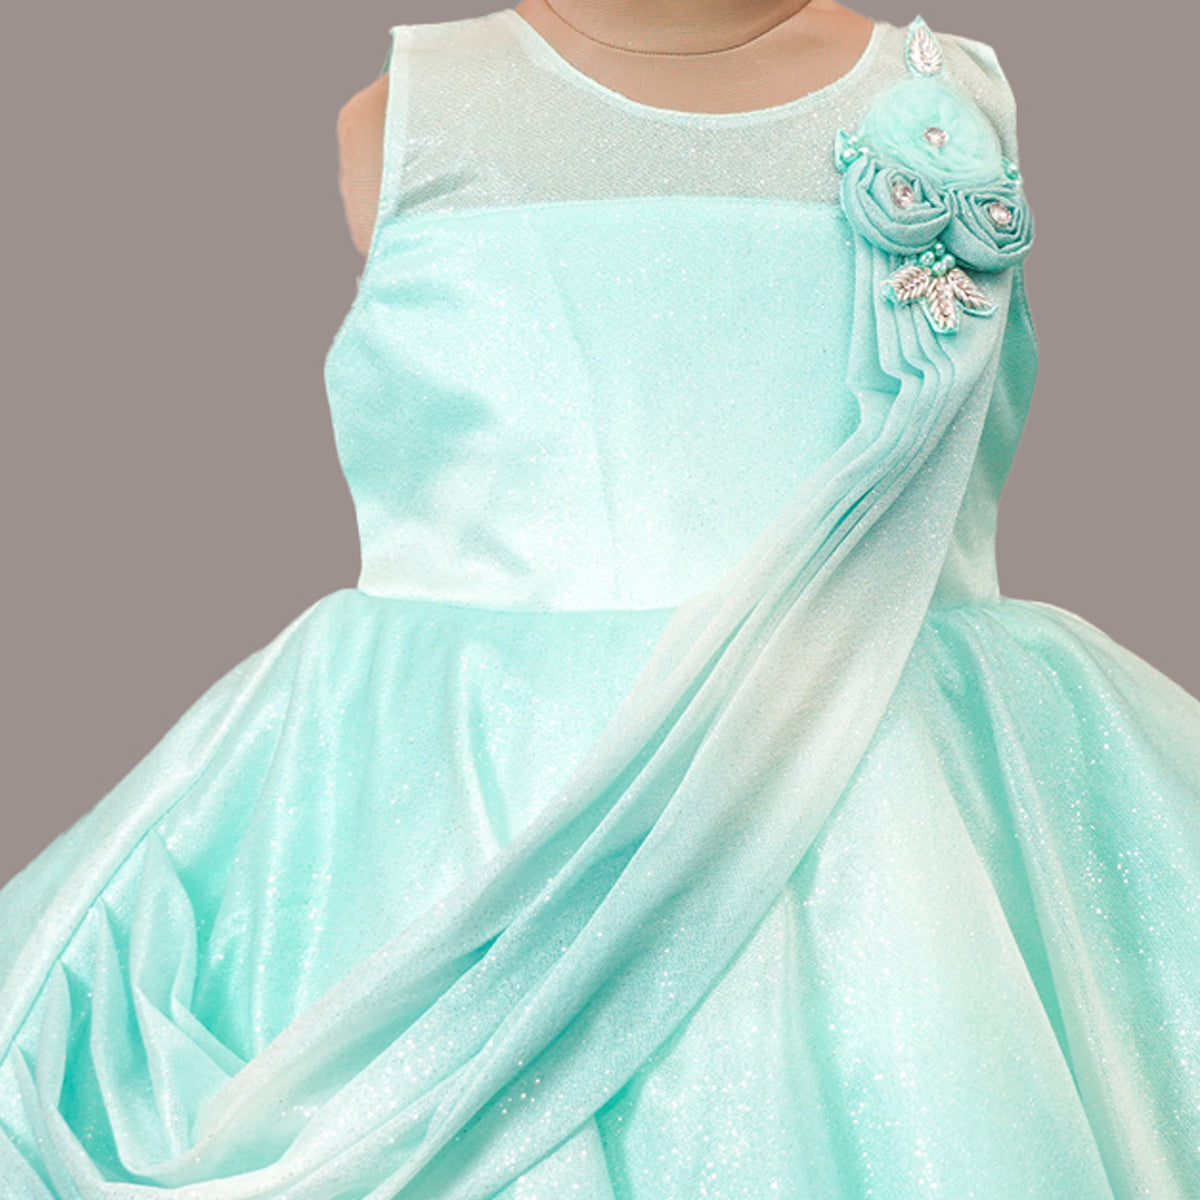 A Childs Birthday Party Frock Design  Lavender The Boutique